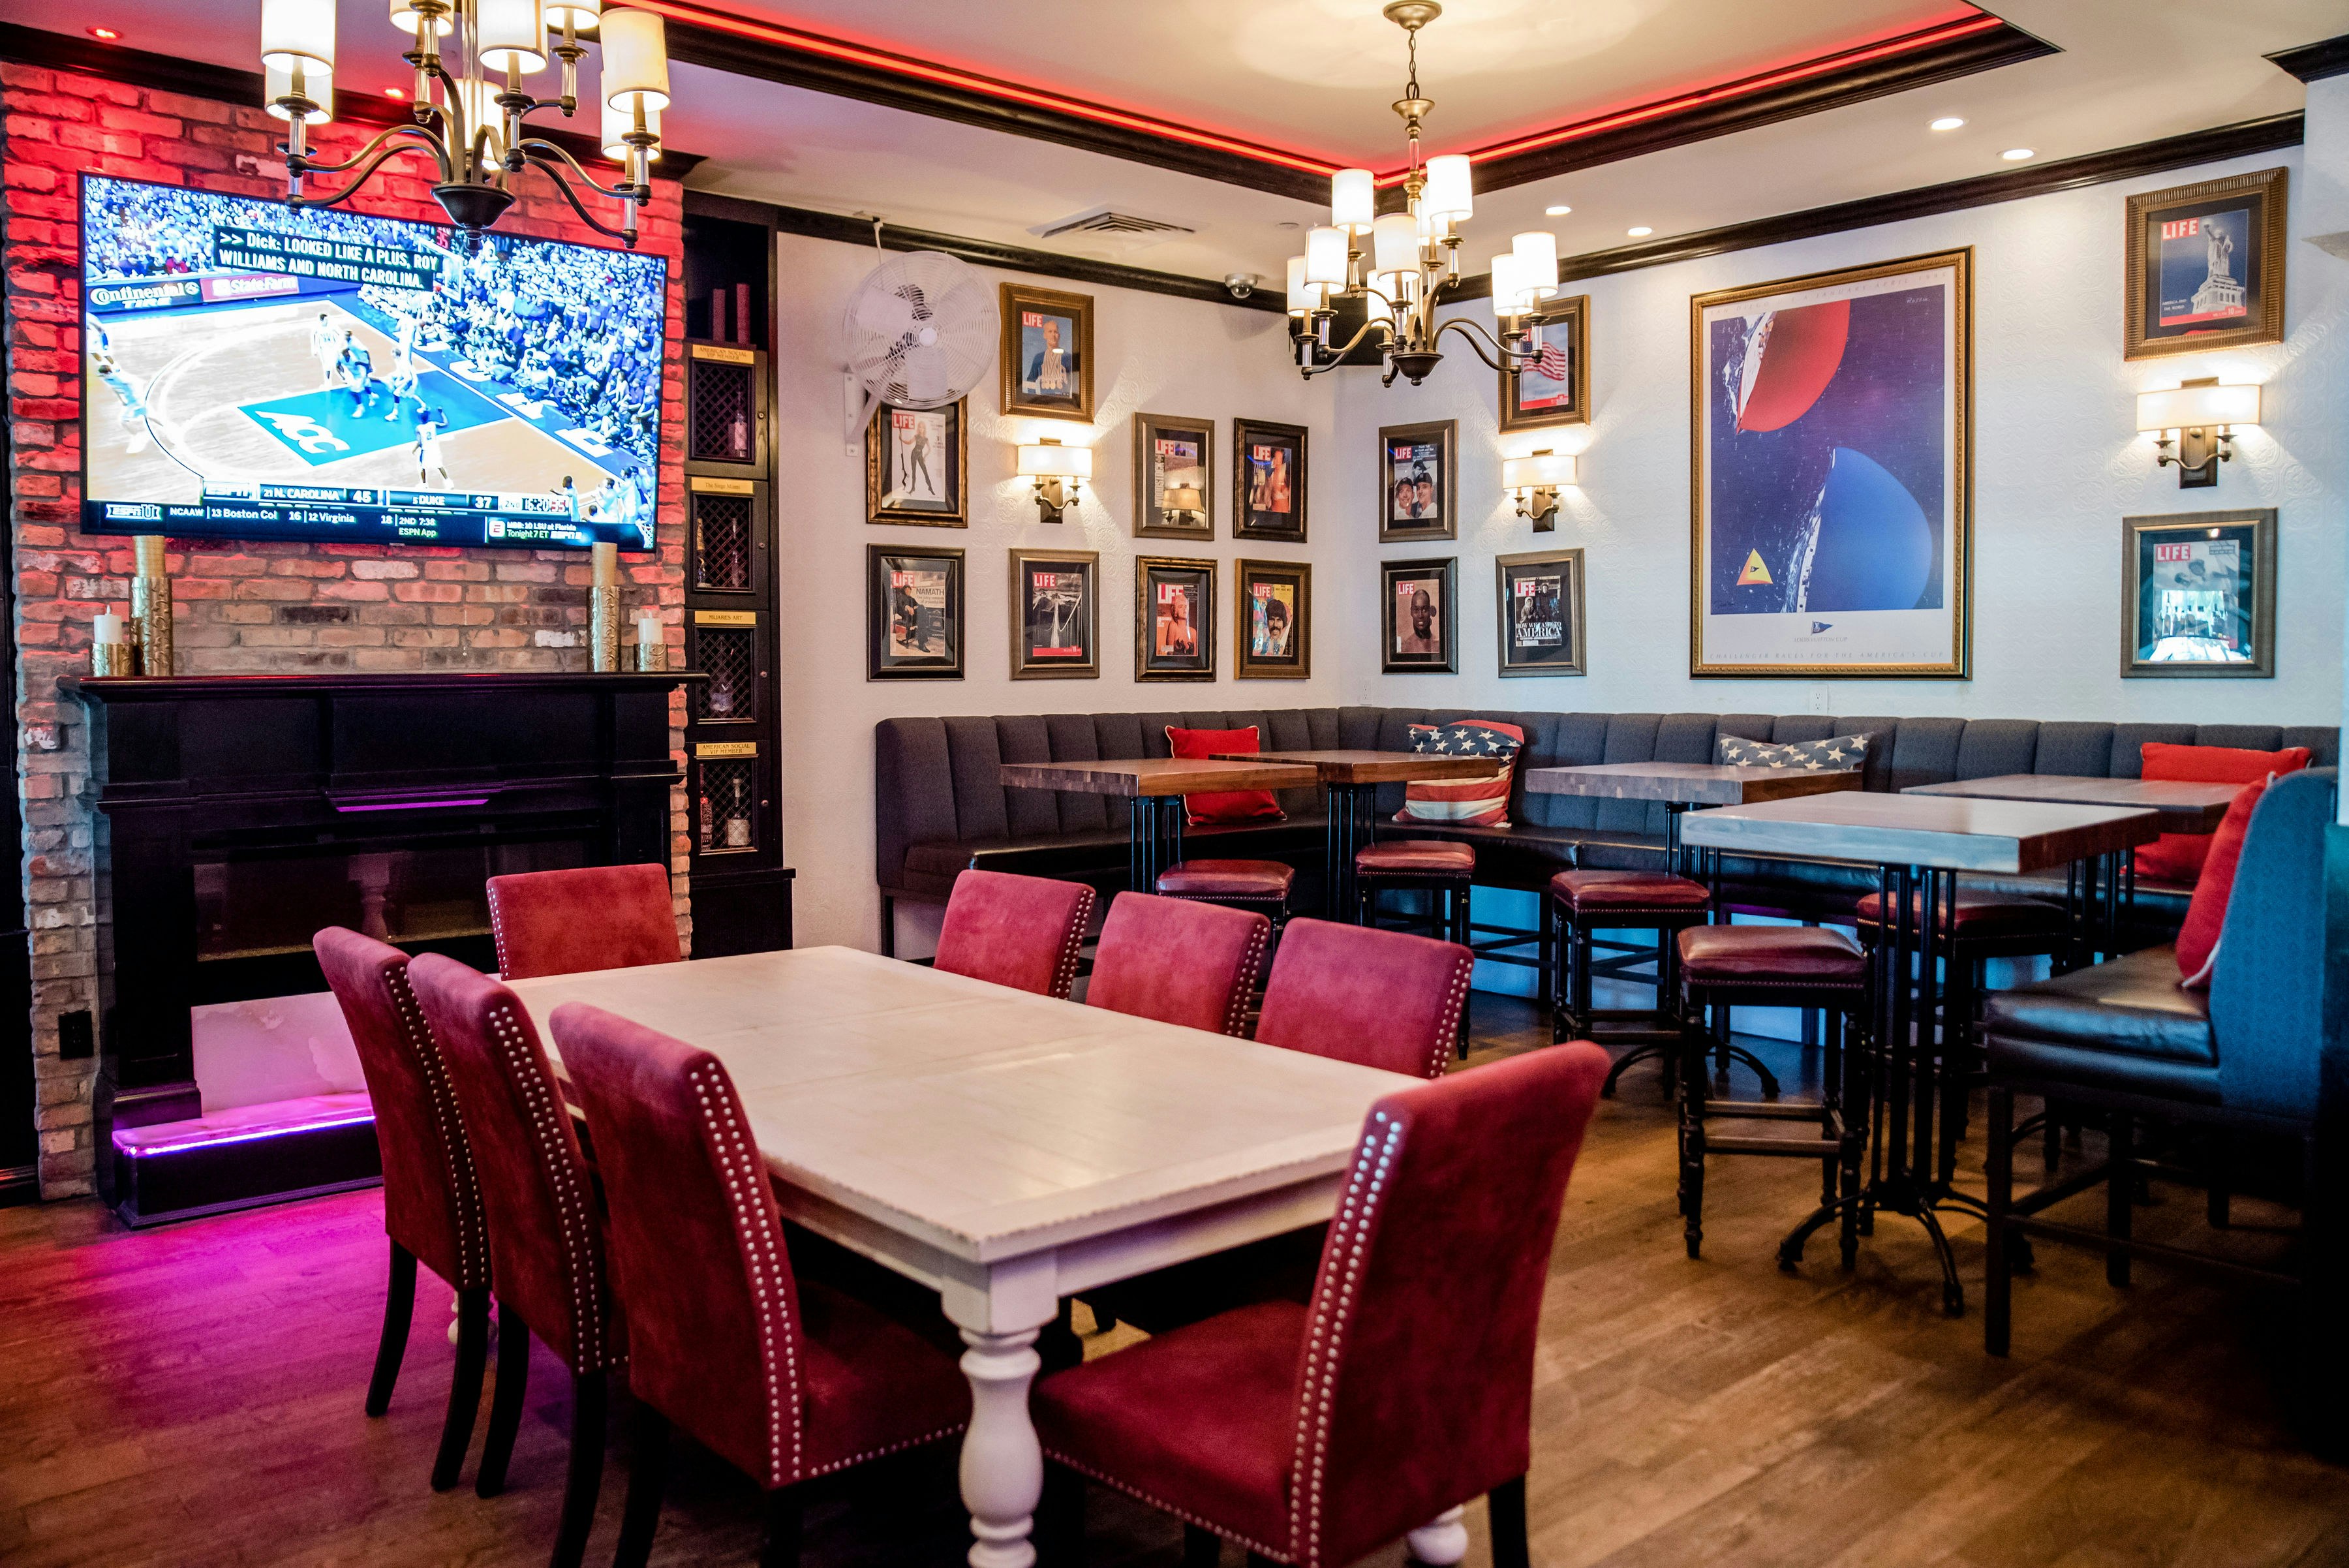 Interior of American Social Bar filled with plush chairs and wooden tables. There is a large TV on a brick wall above a faux fireplace.  